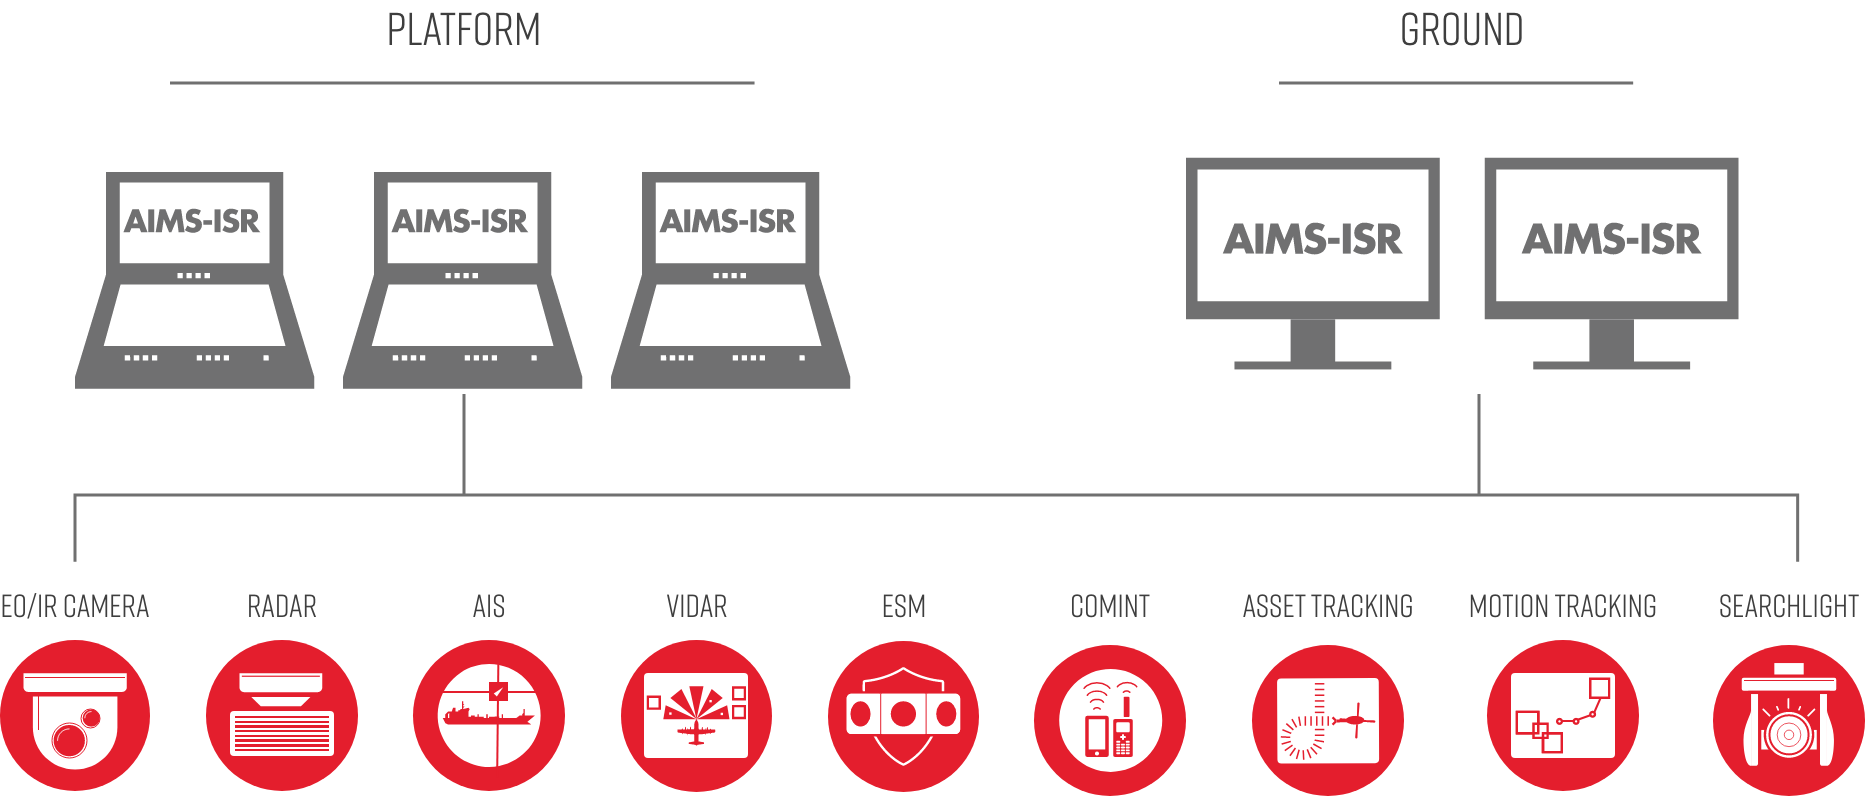 AIMS-ISR architecture overview showing how the various systems connect